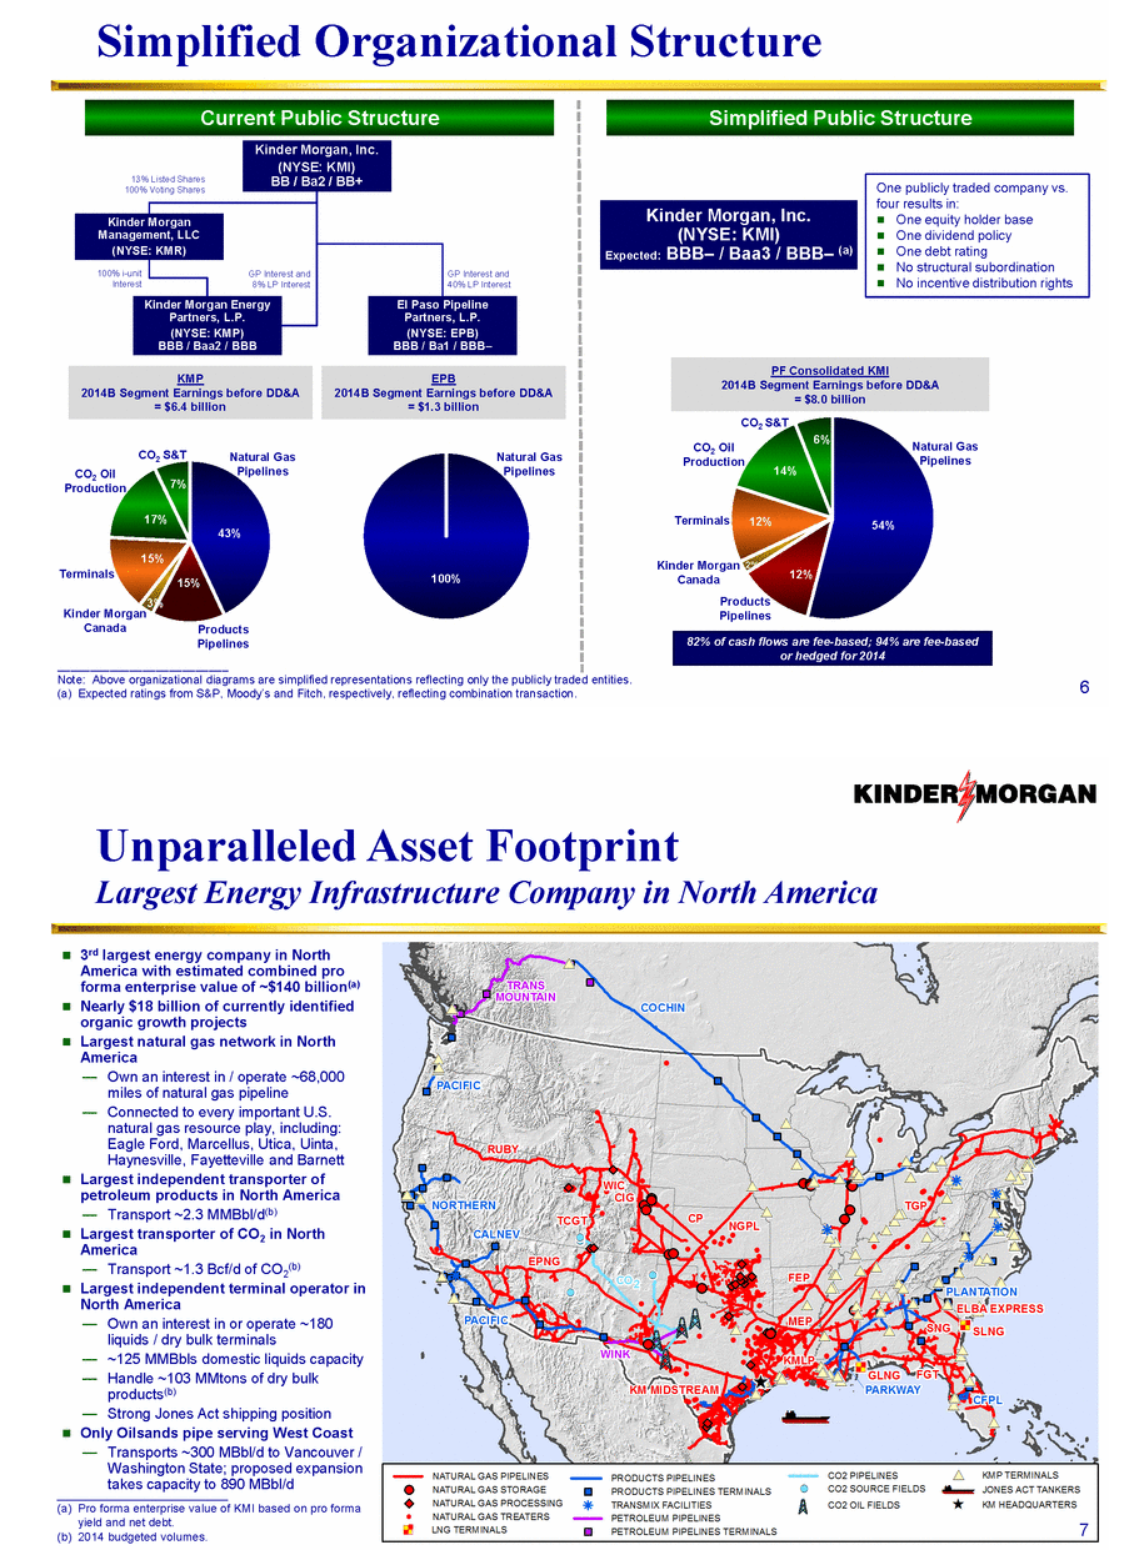 KMI New Footprint and structure